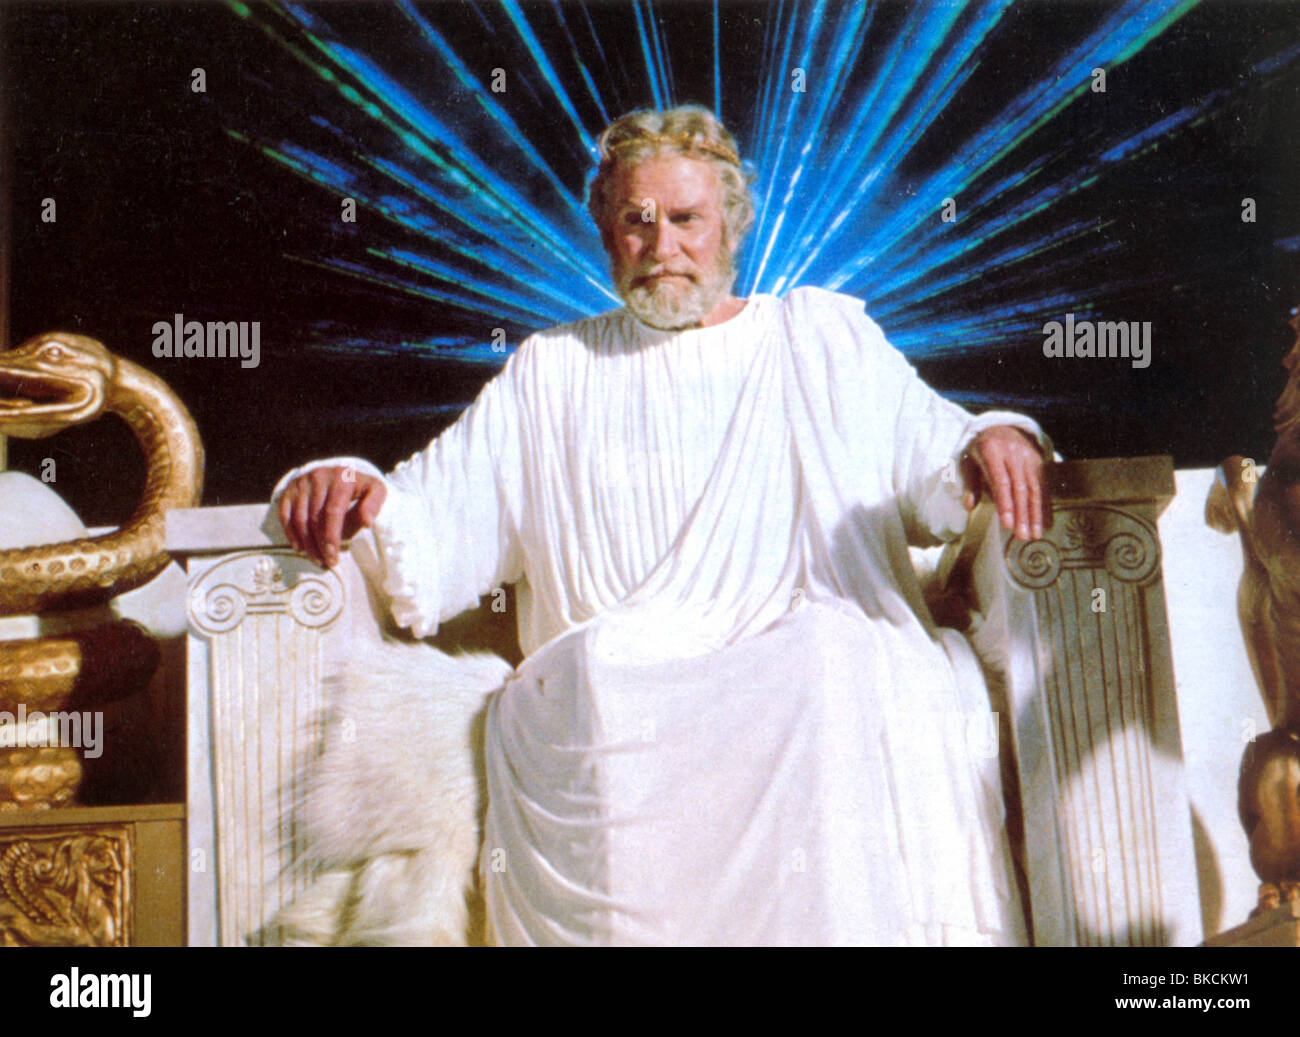 CLASH OF THE TITANS (1981) LAURENCE OLIVIER CLTT 004FOH Stock Photo